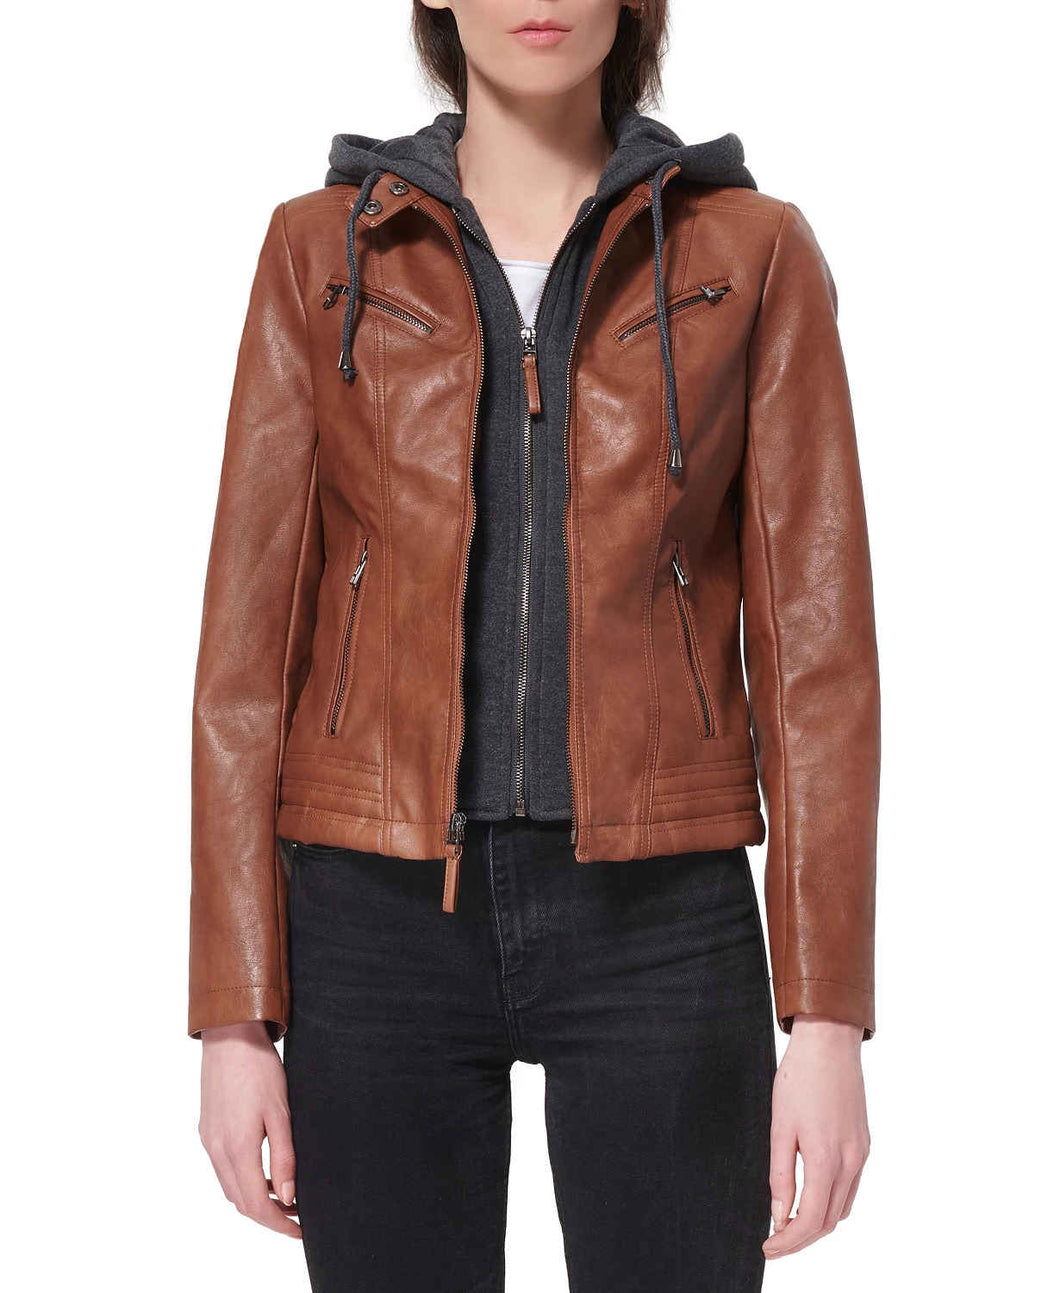 Brown Women Real leather Jacket